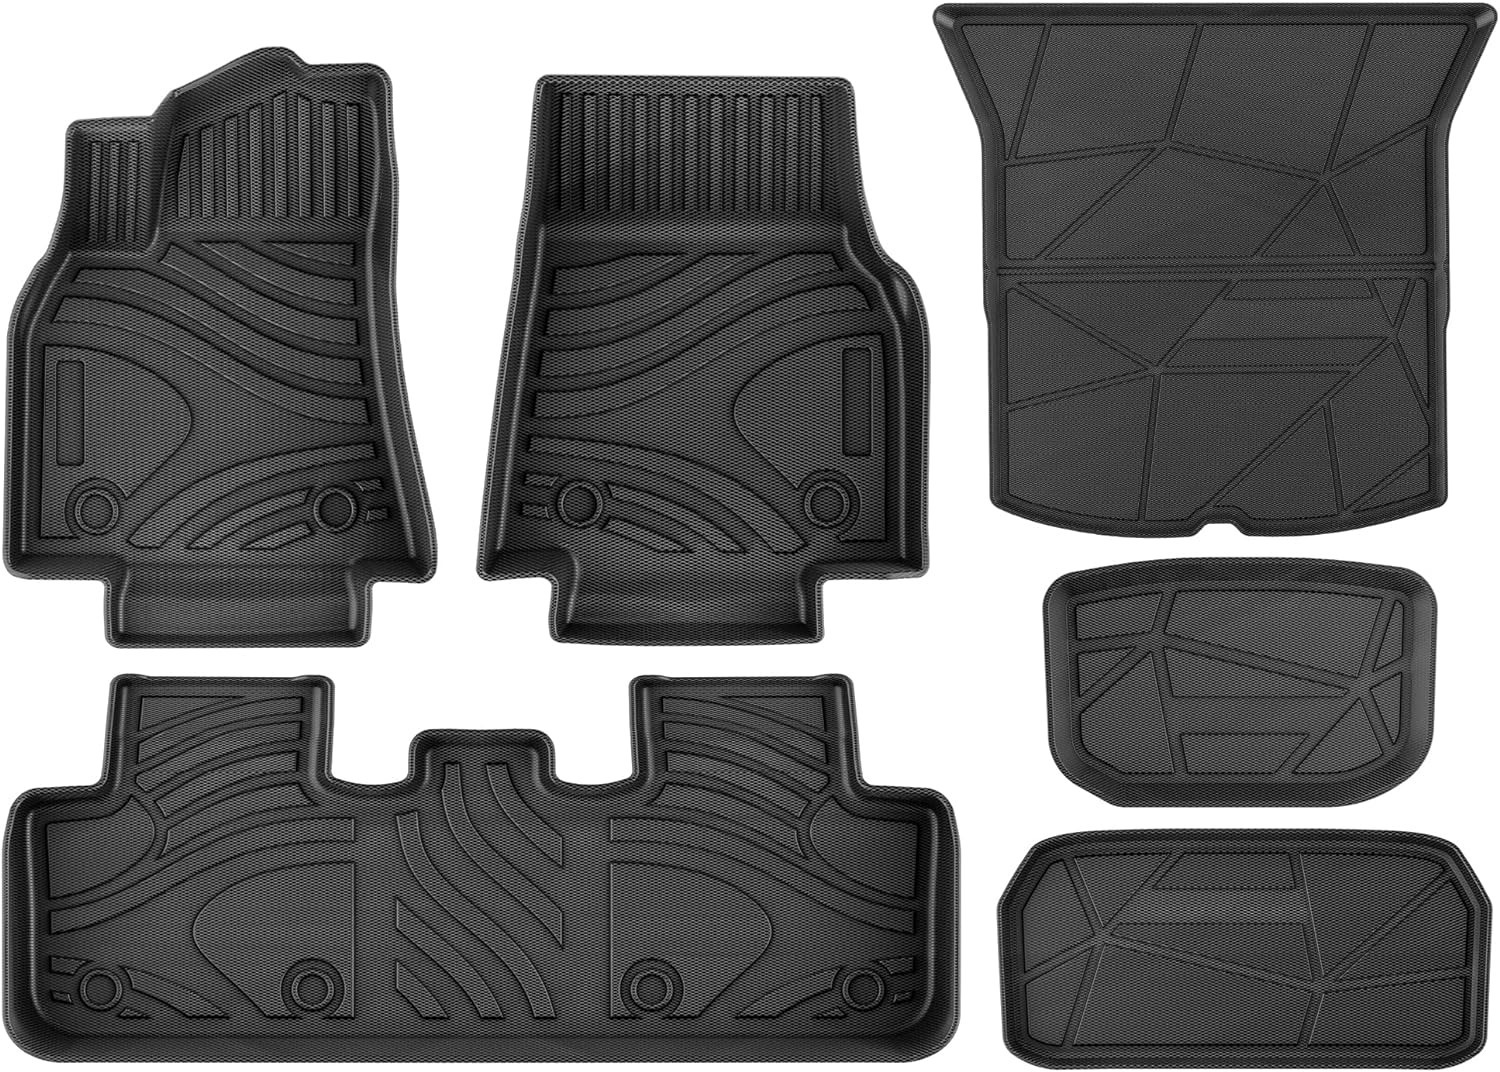 6-PC AUTOSAVER88 Floor Mats for Tesla Model Y 2020-2024 (5-Seat) $57.60 + Free Shipping